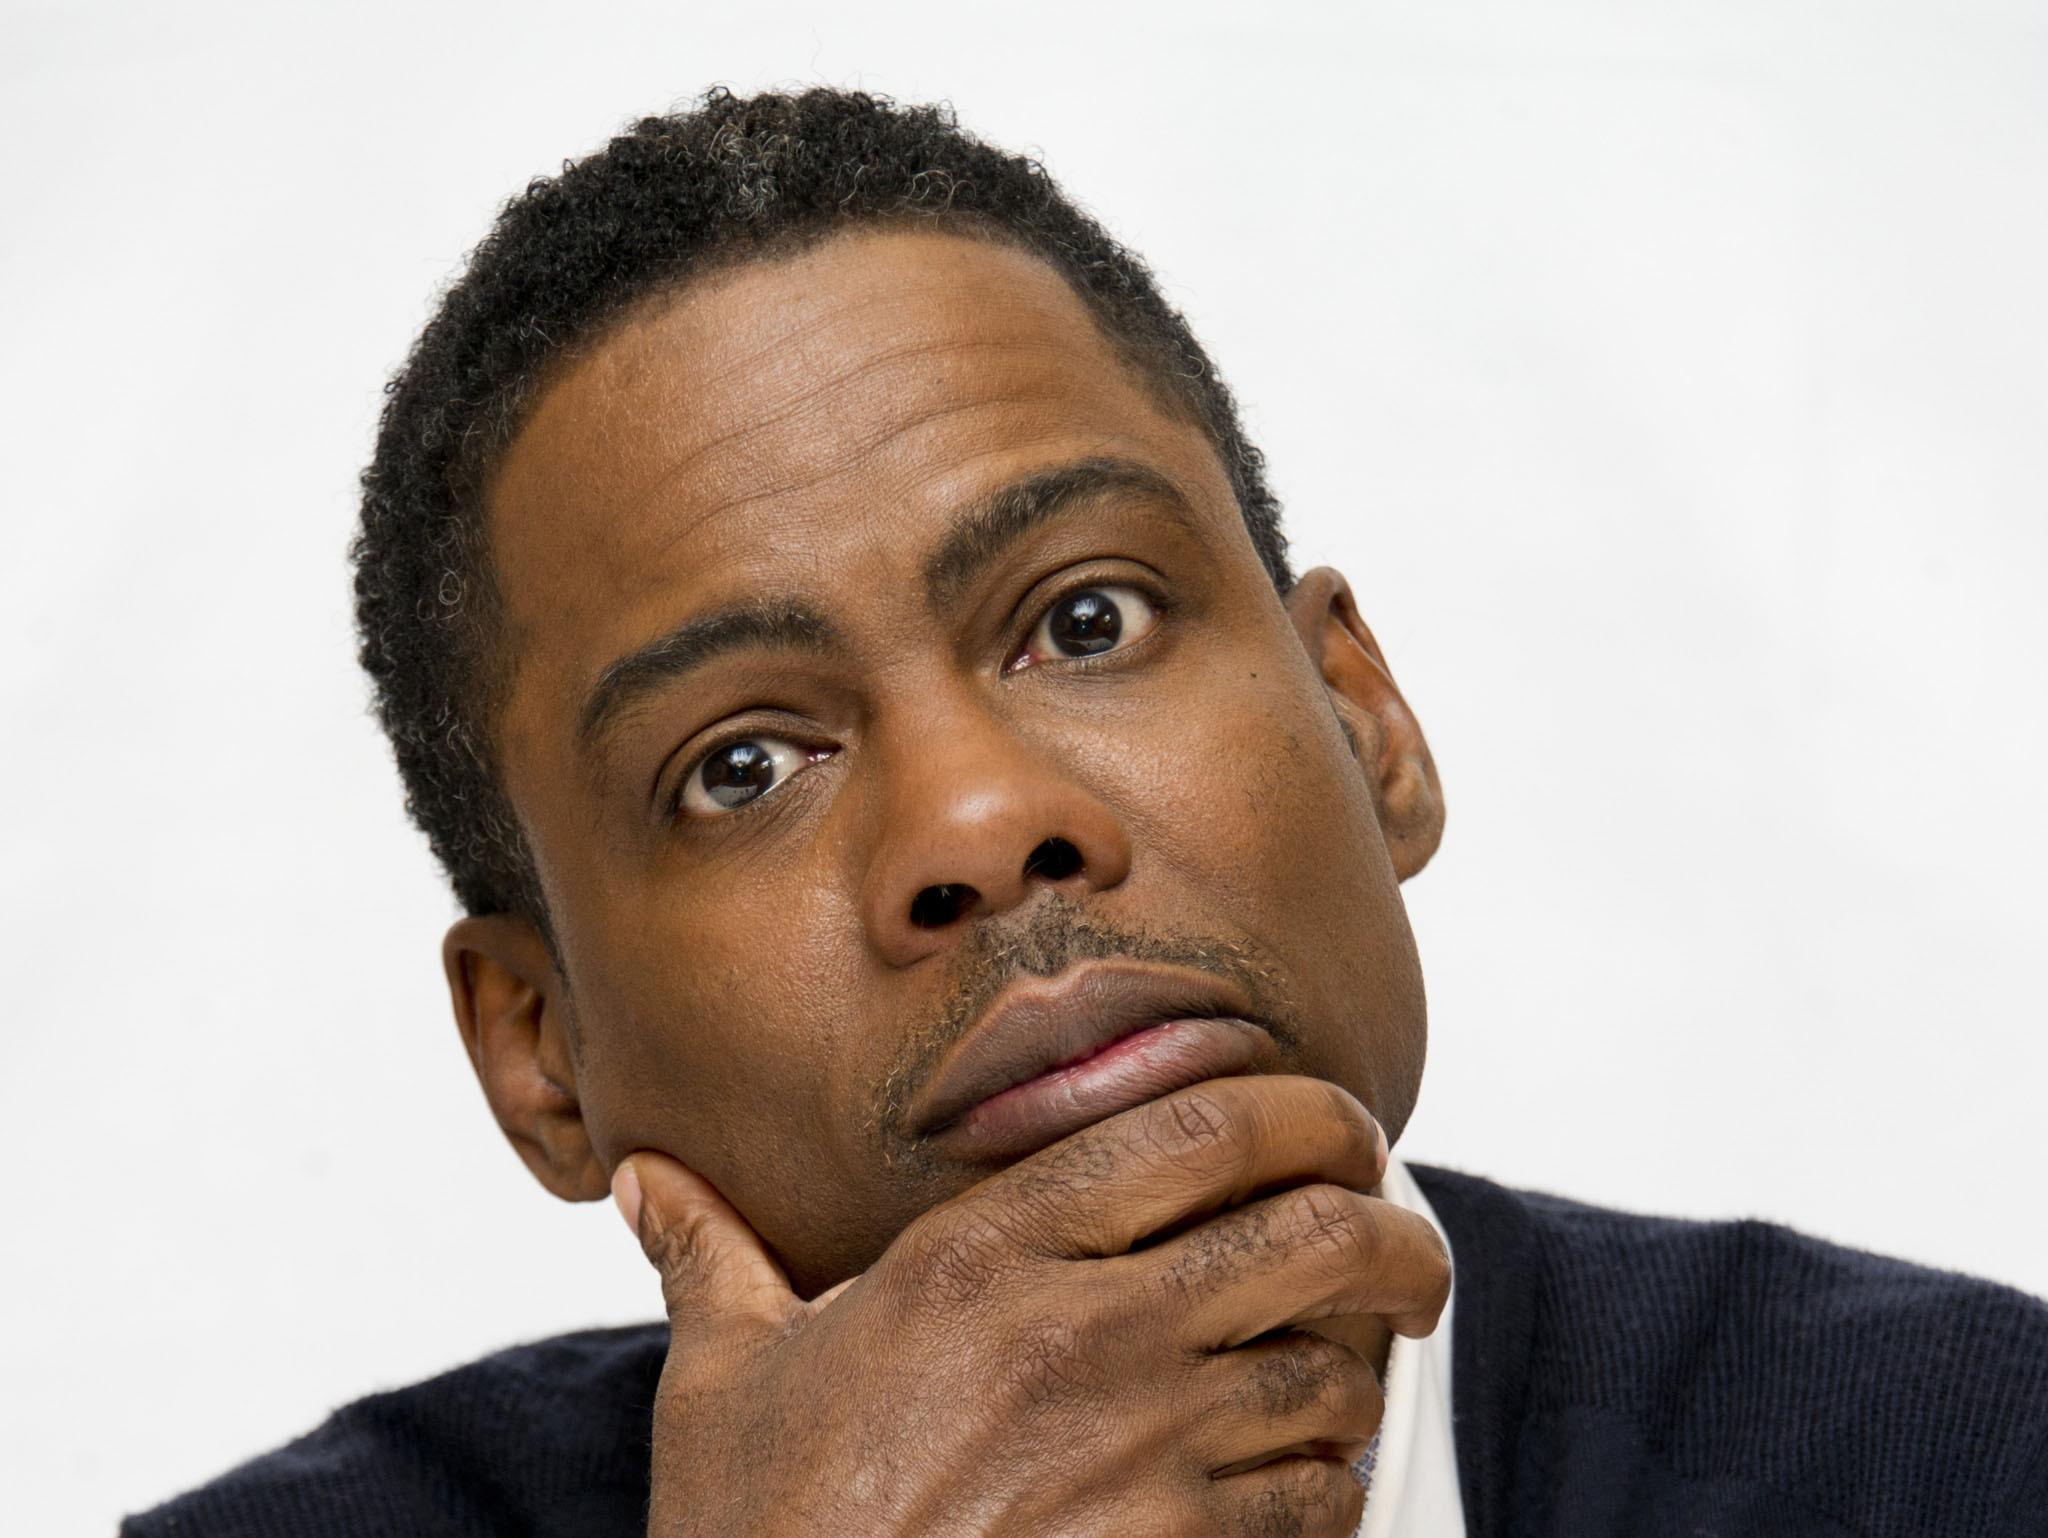 Chris Rock Wallpaper Image Photo Picture Background